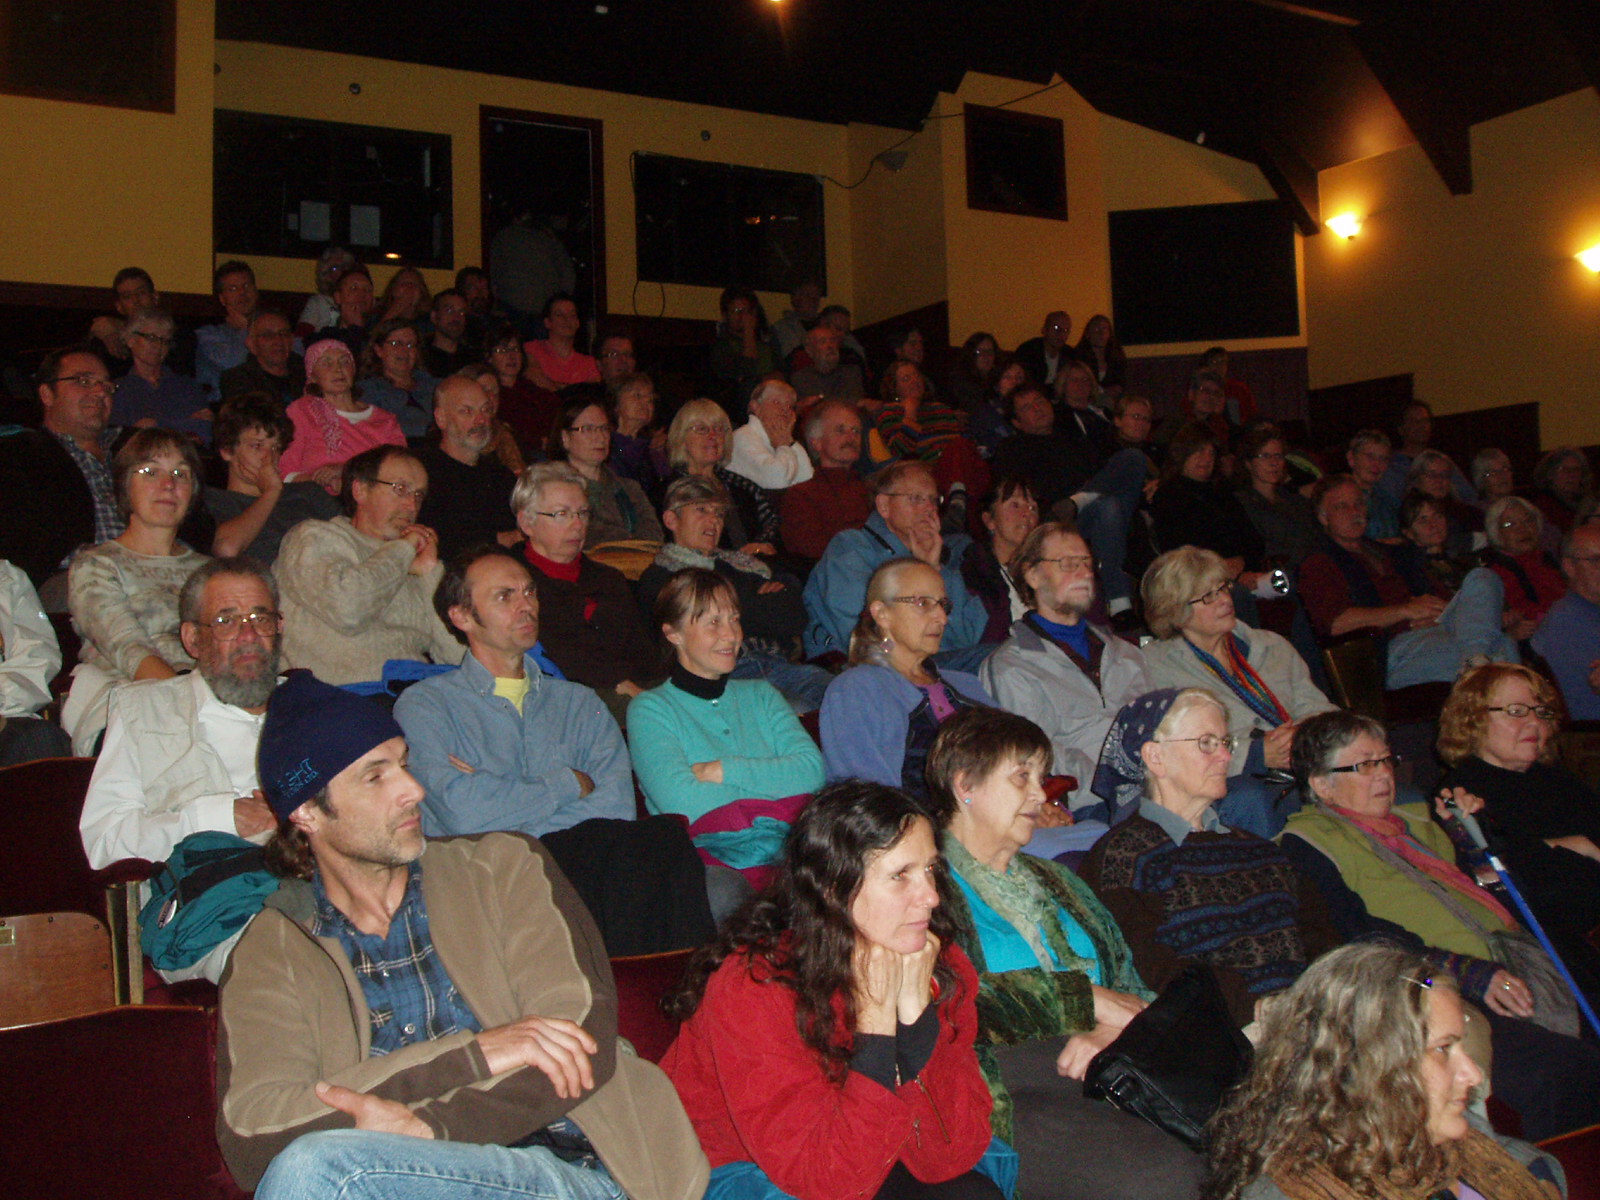 95 attended the screening and stayed for the discussion